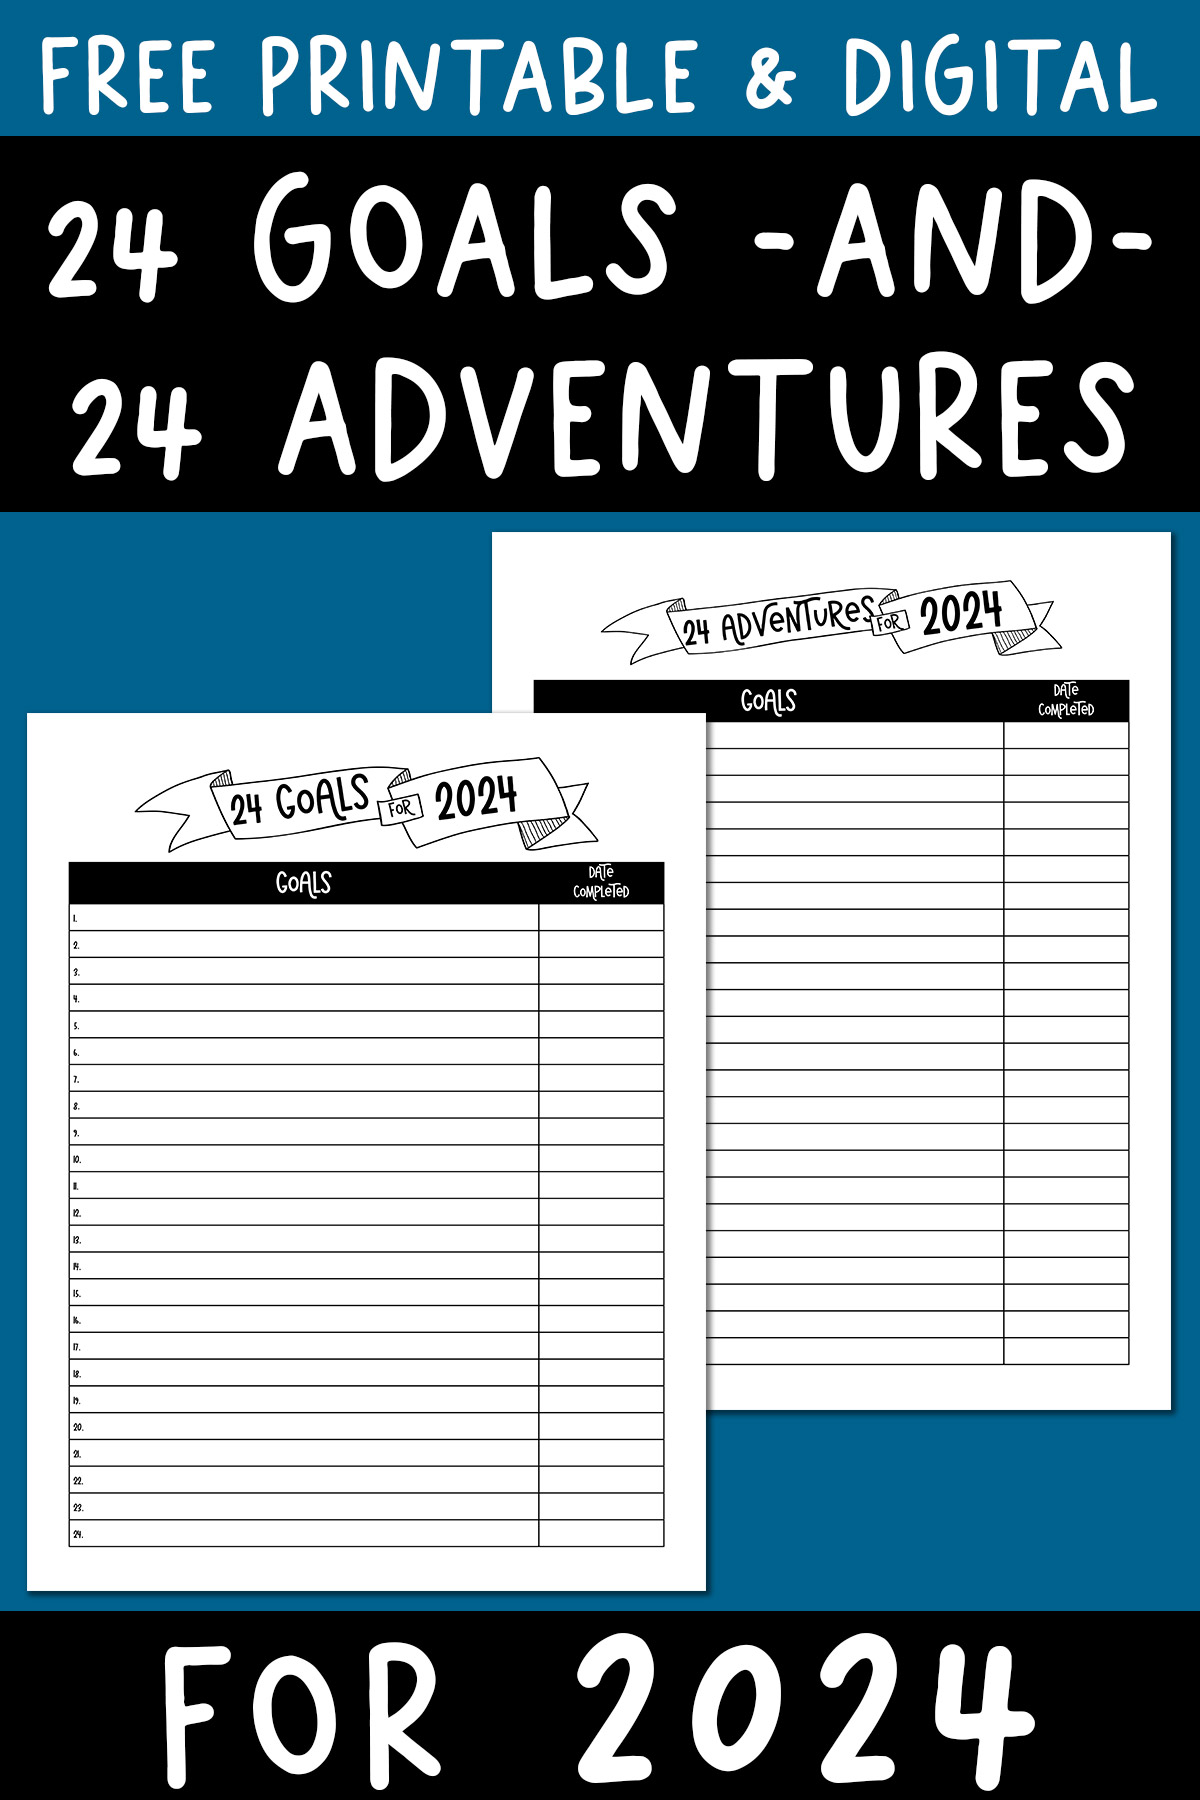 At the top it says free printable & digital 24 goals and 24 adventures for 2024. Below that are 2 free printable examples.